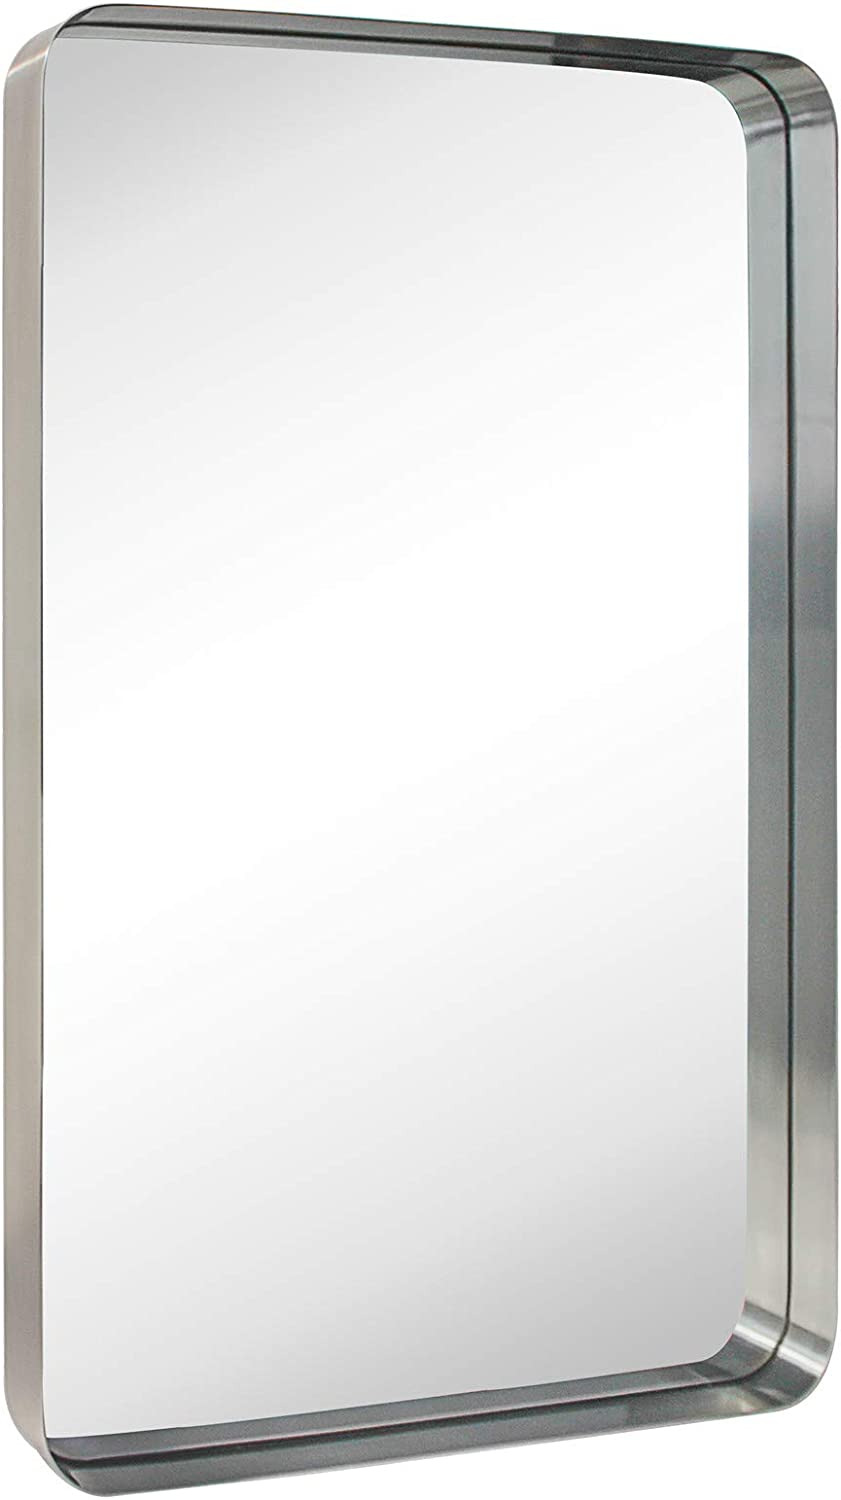 24x36 Inch Brushed Nickel Silver Metal Framed Bathroom Mirror For Wall In Stainl